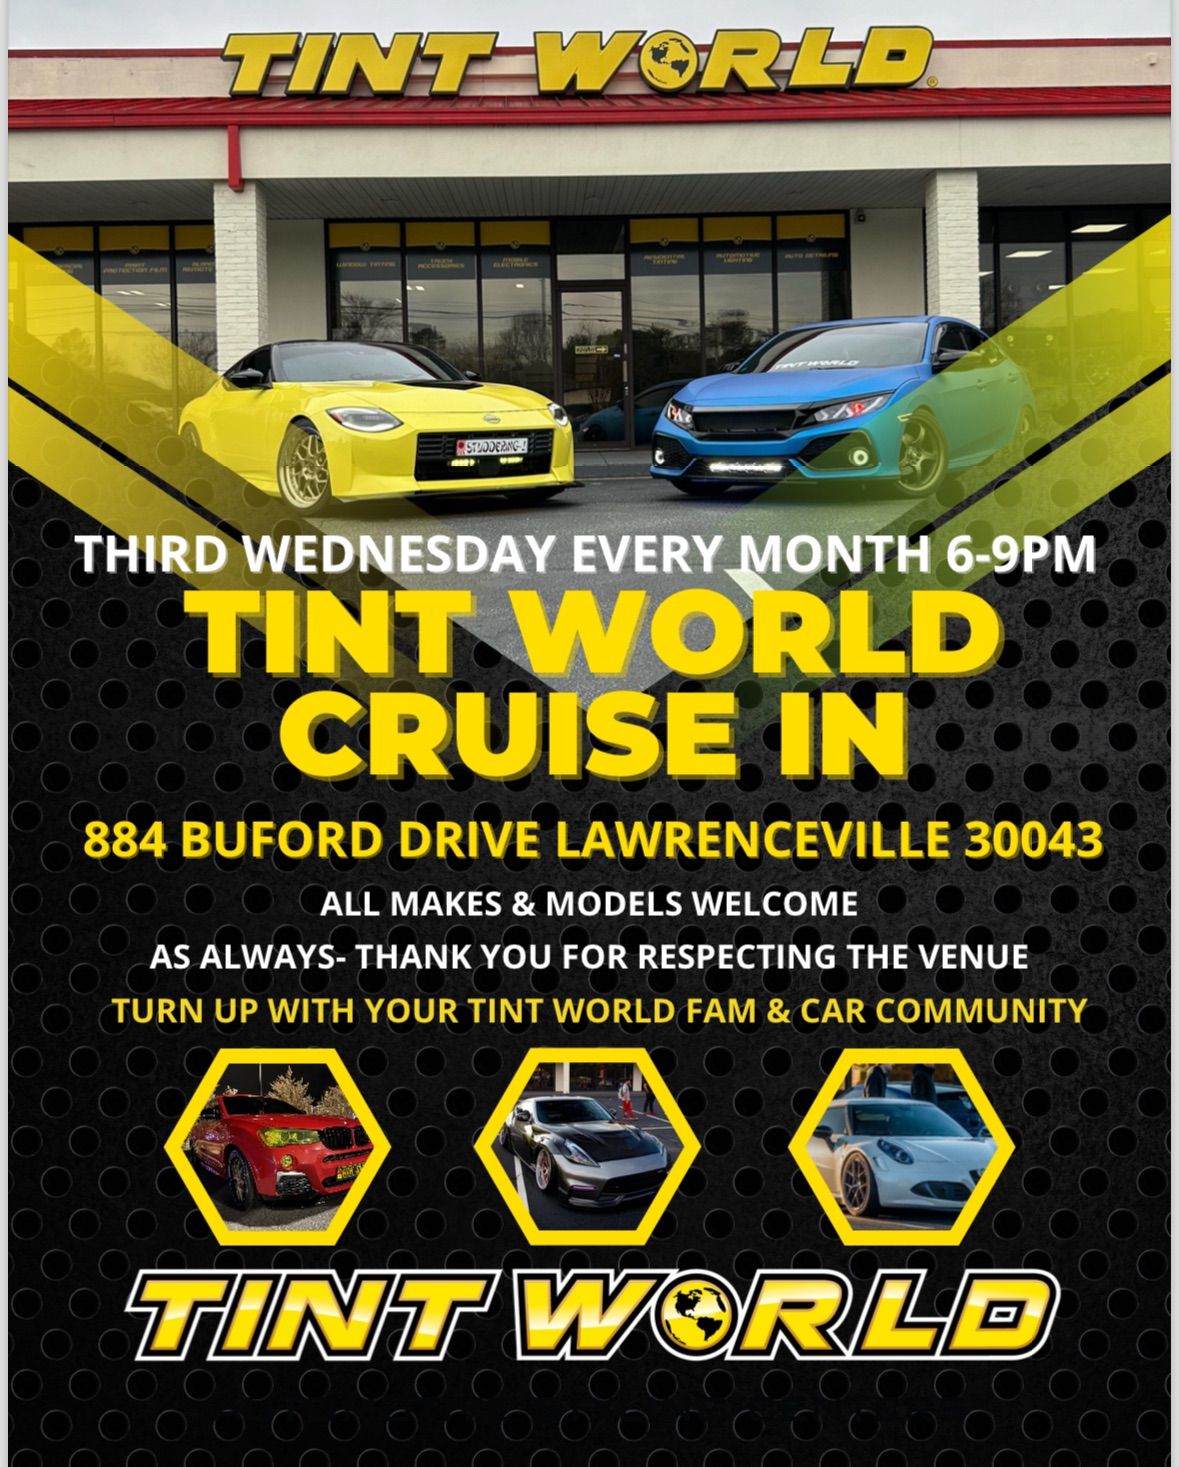 Wednesday Night Cruise In- Tint World Lawrenceville 